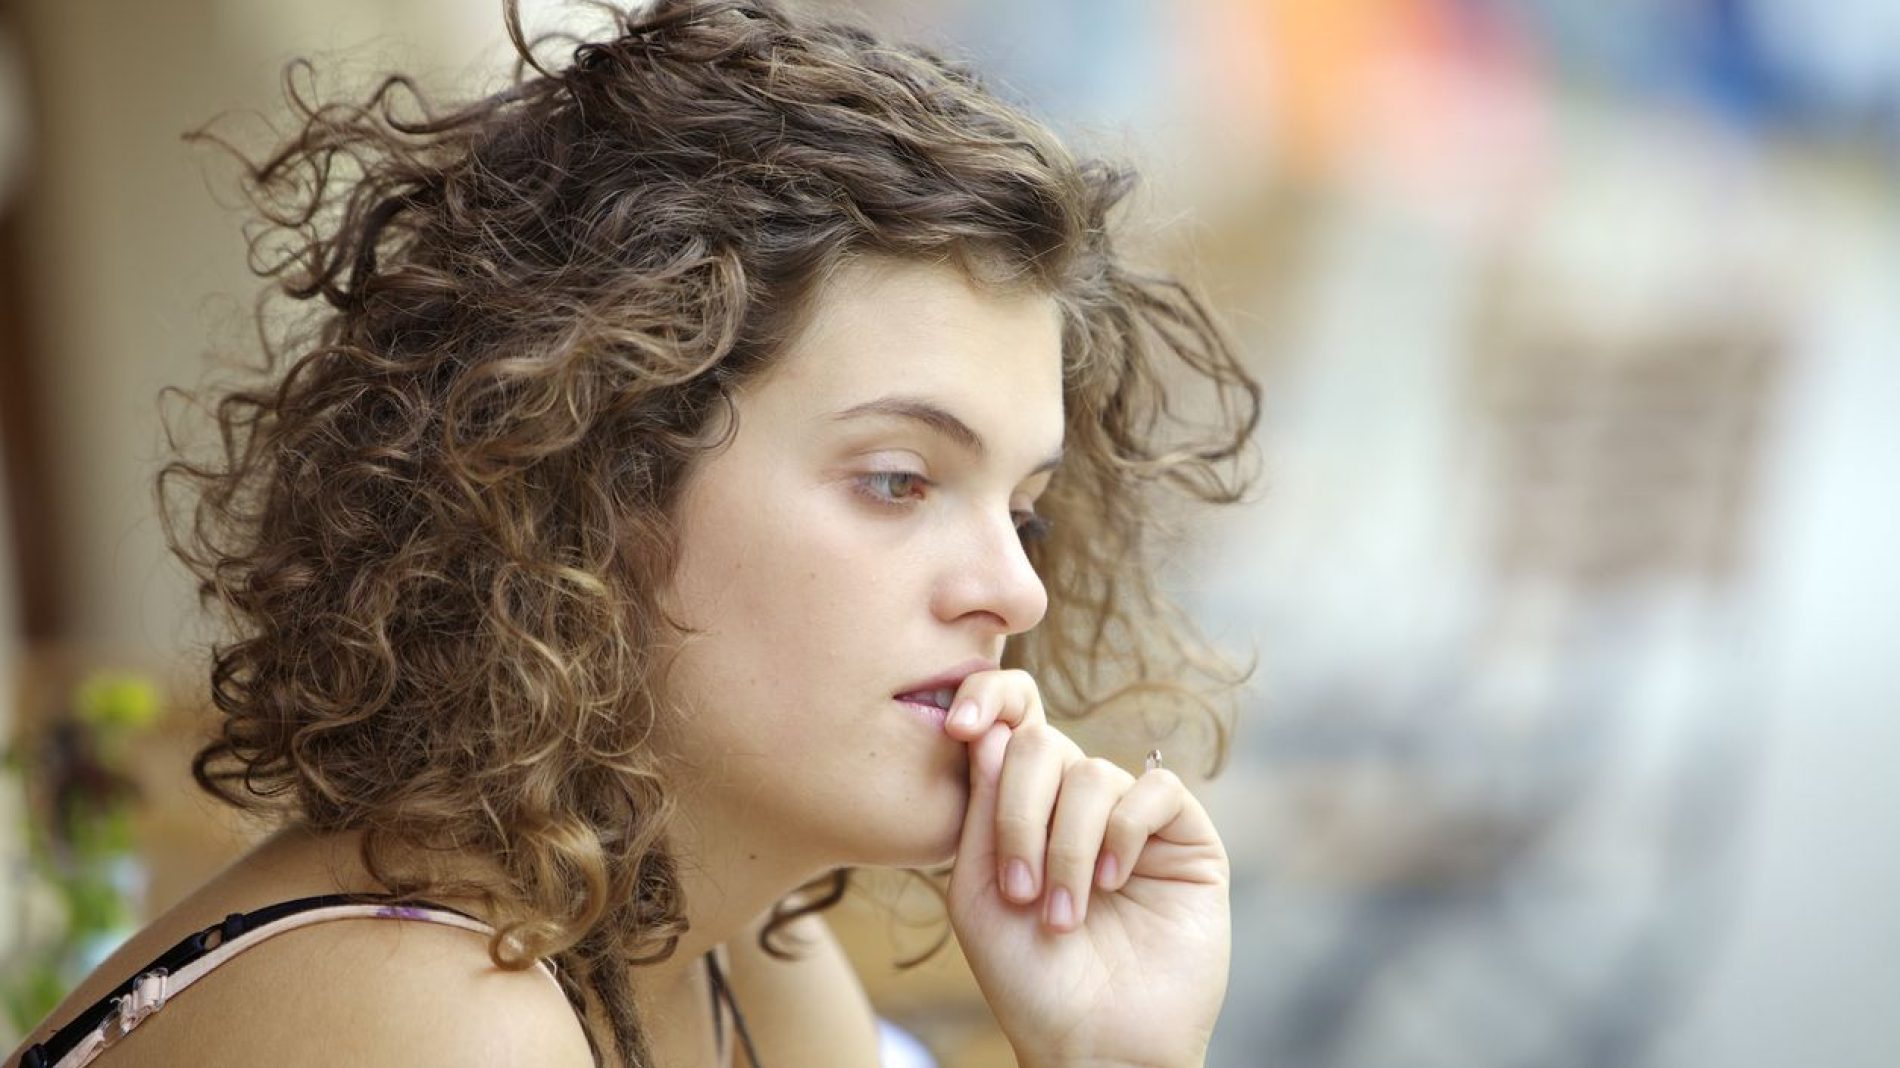 Young woman thinking and looking worried